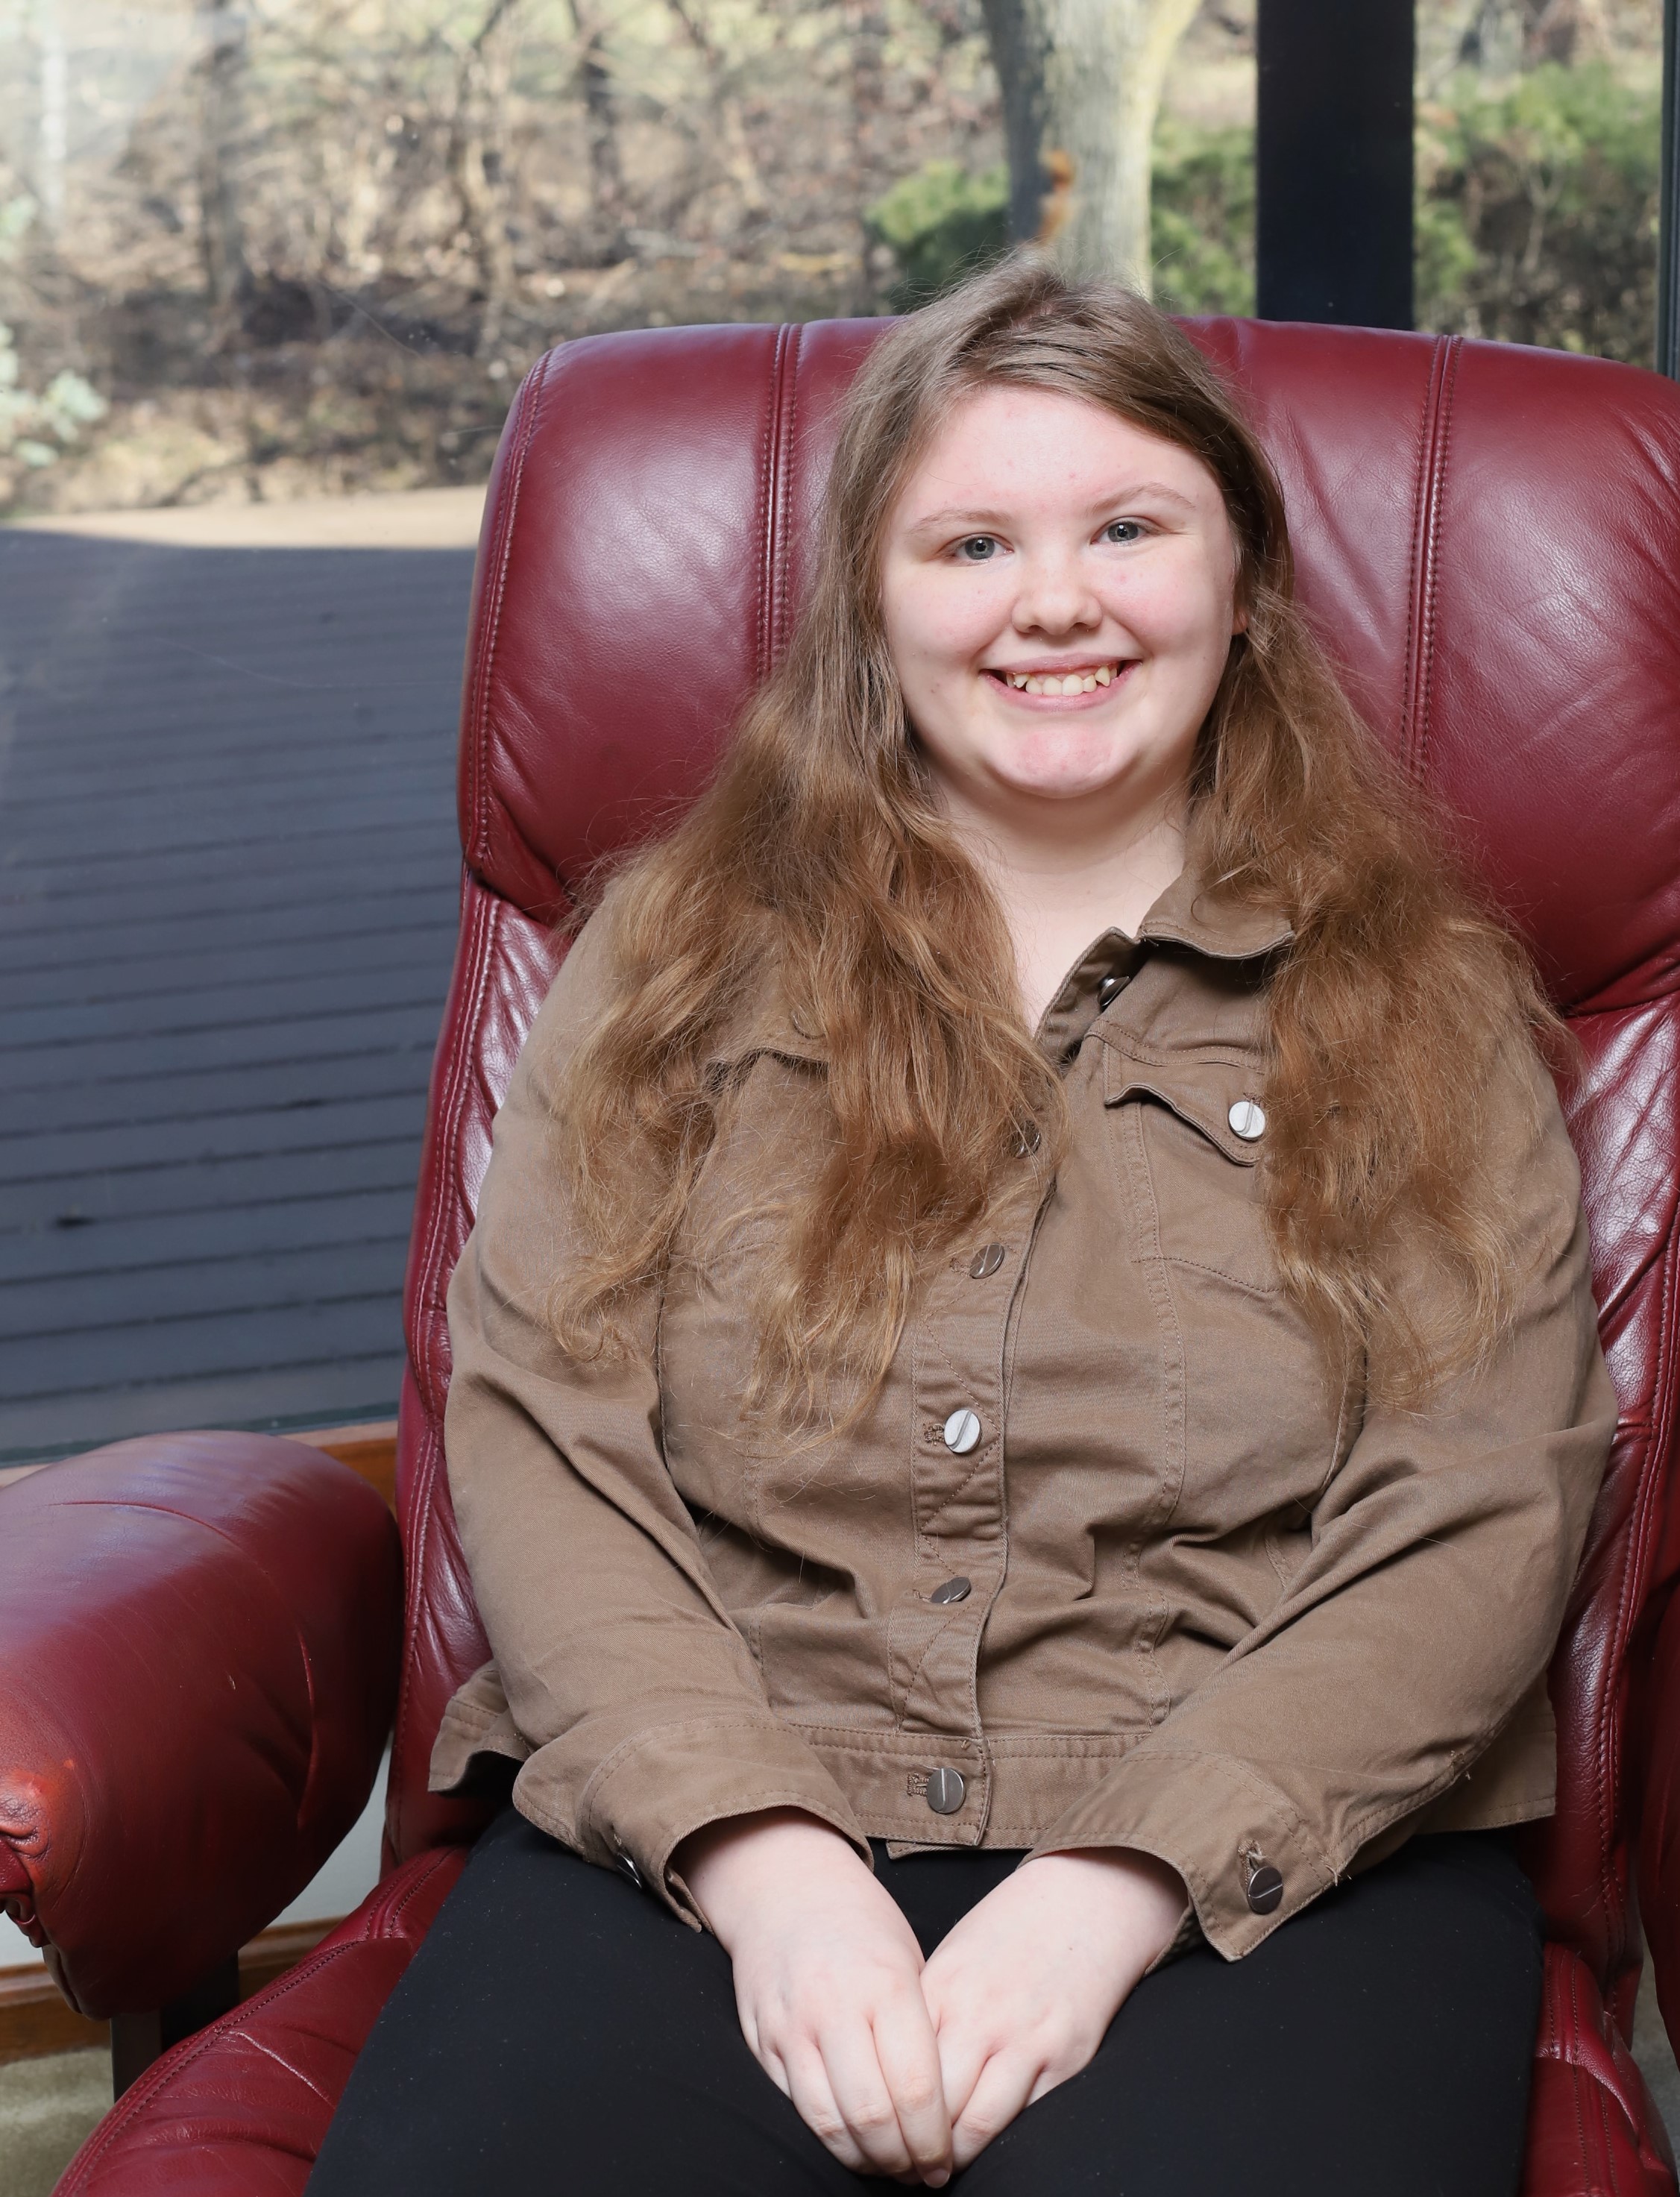 smiling young lady looking a camera with hands in lap